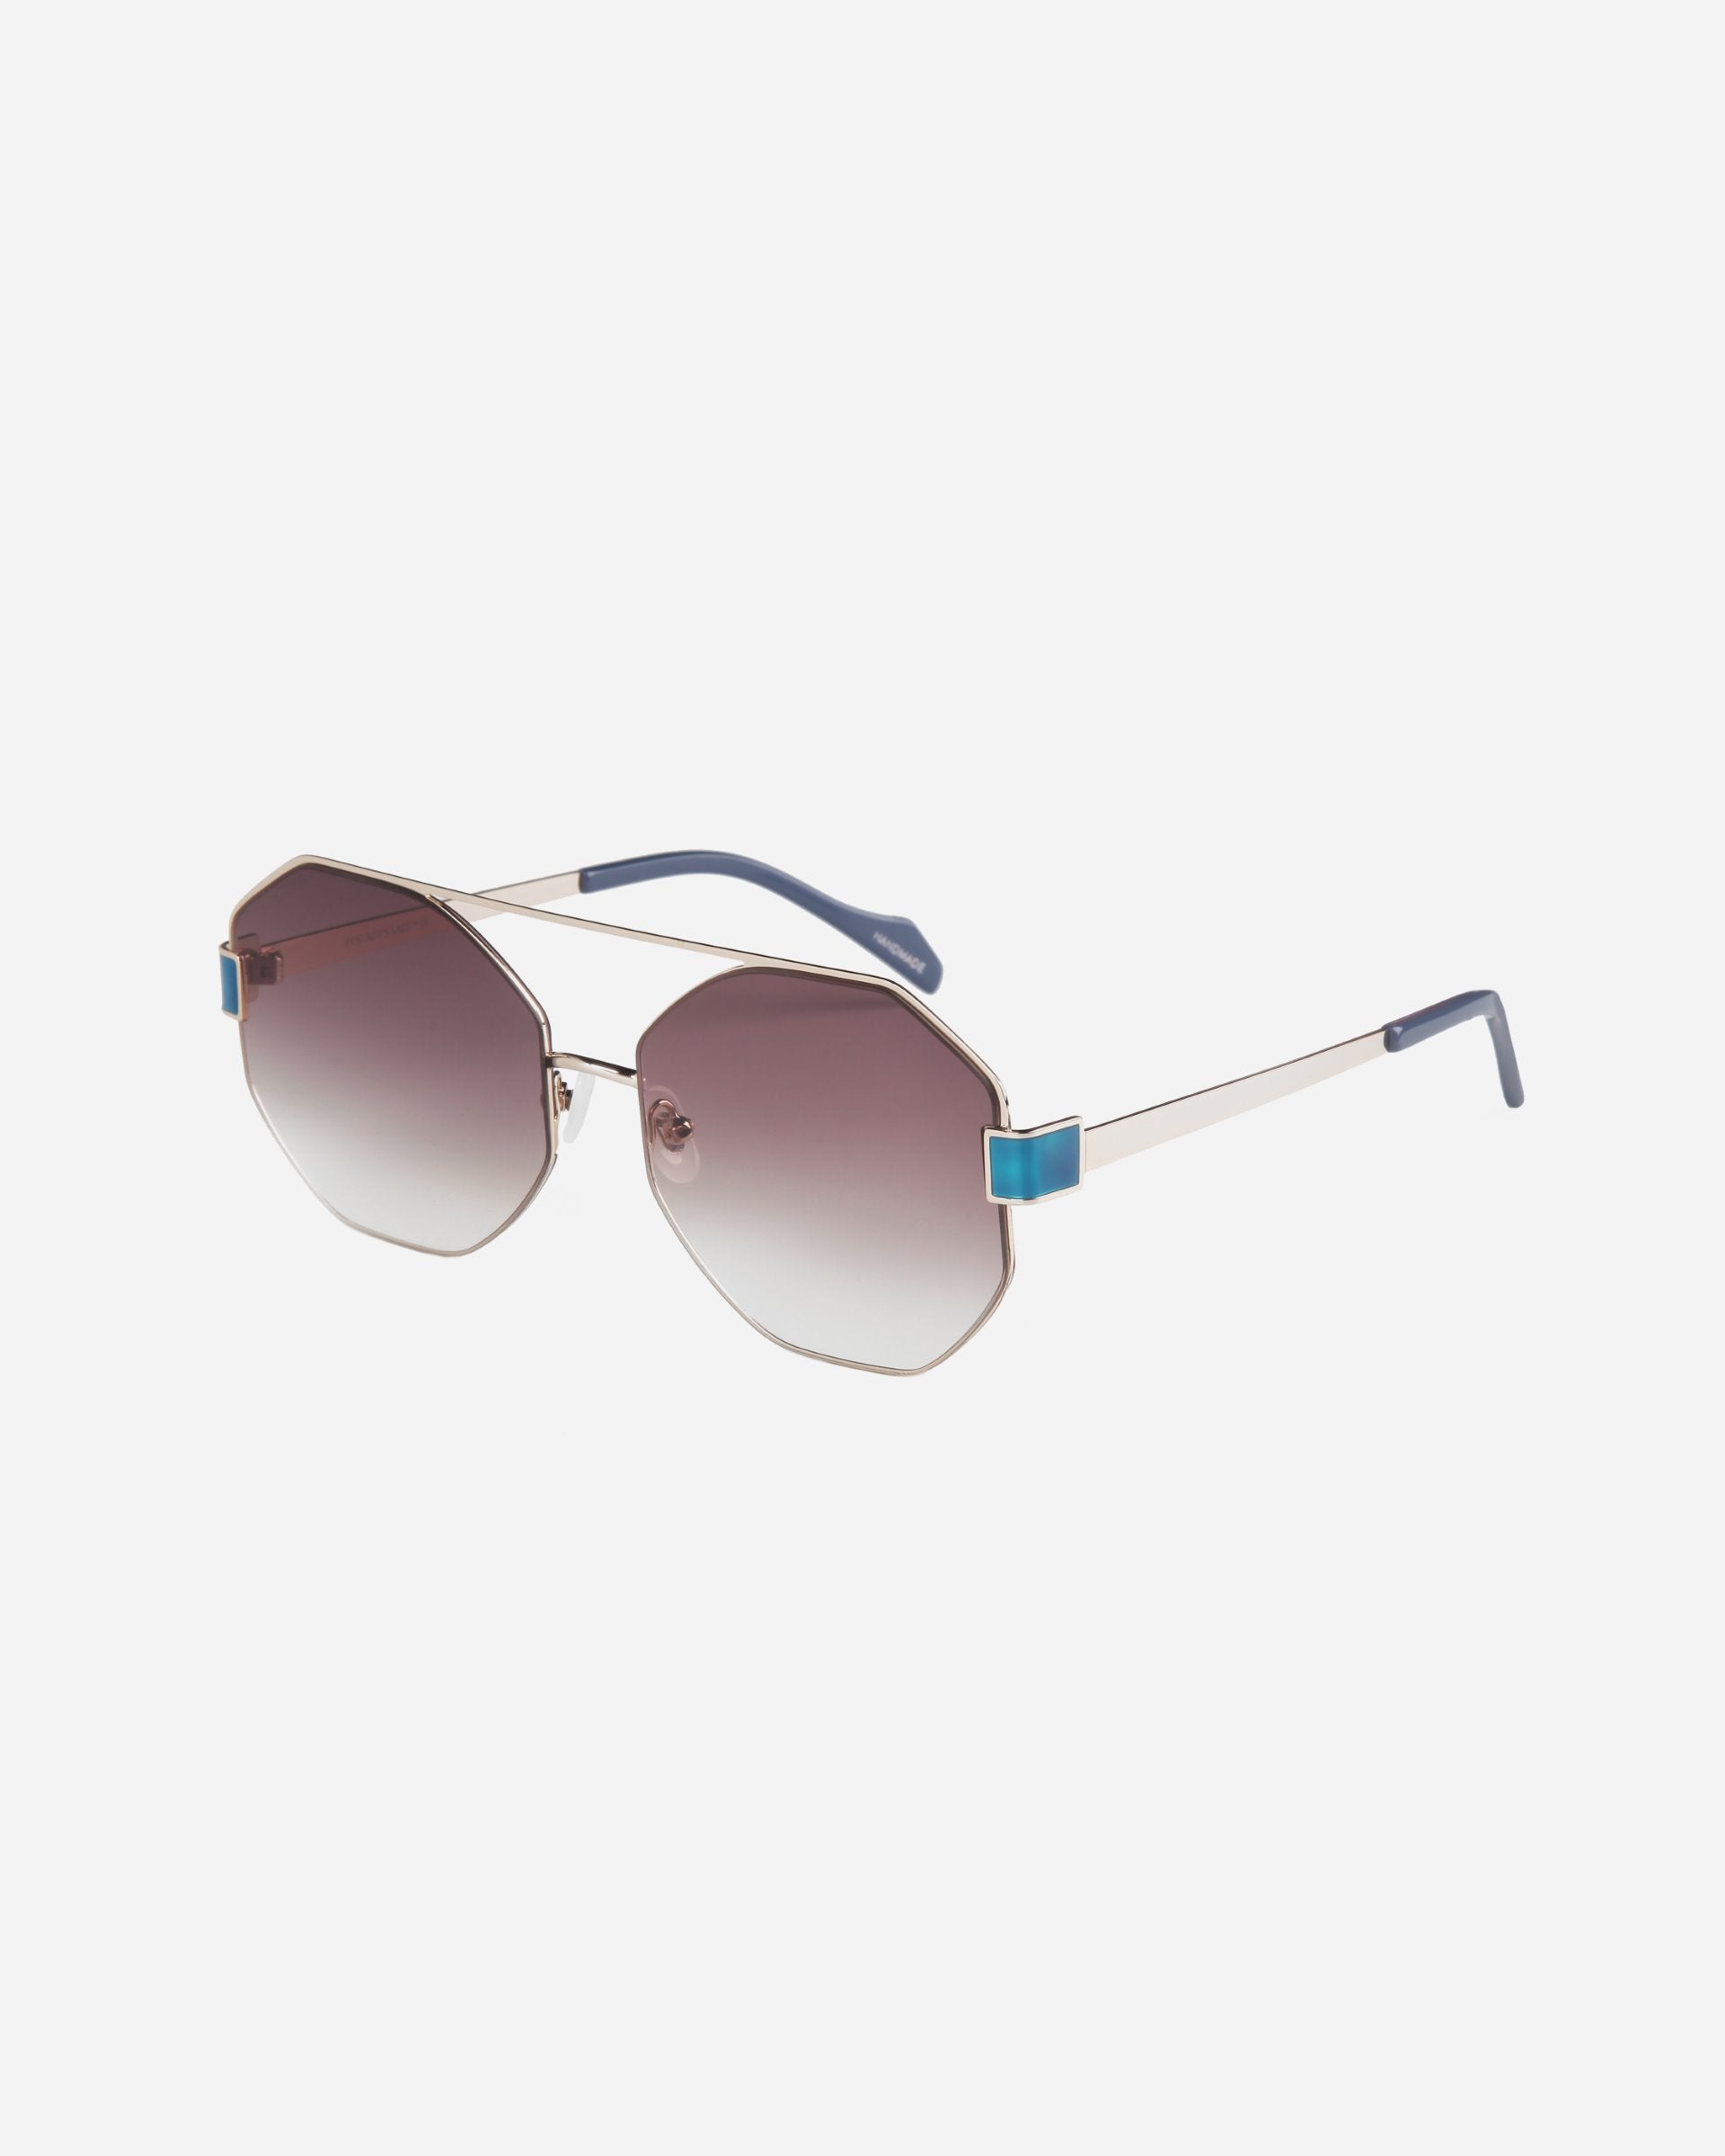 A pair of For Art&#39;s Sake® Mania sunglasses with stainless steel, hexagonal frames and gradient nylon lenses that transition from dark at the top to lighter at the bottom. The temples are thin with blue tips. The adjustable nosepads are small and clear for comfort.